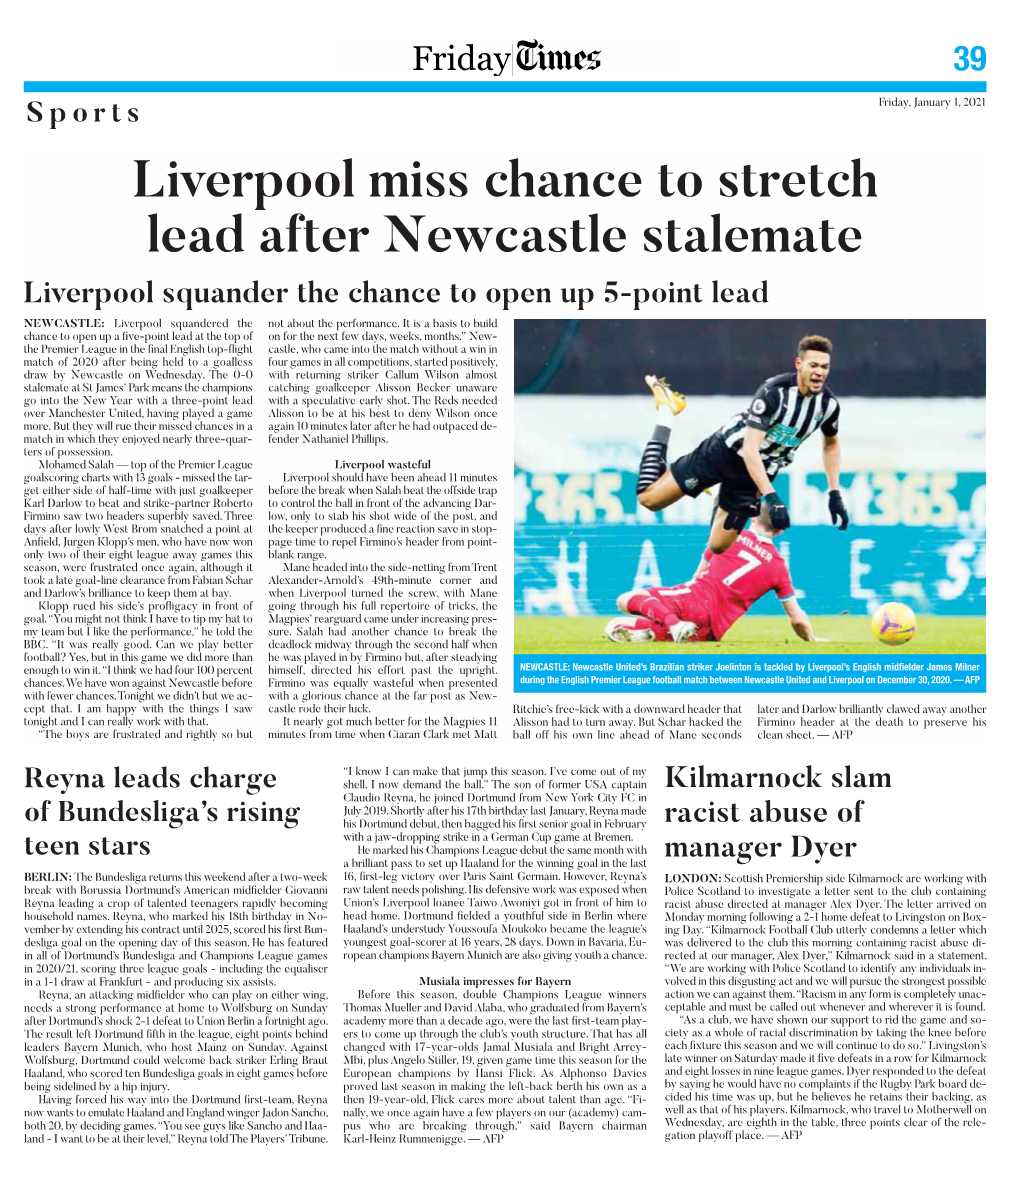 Liverpool Miss Chance to Stretch Lead After Newcastle Stalemate